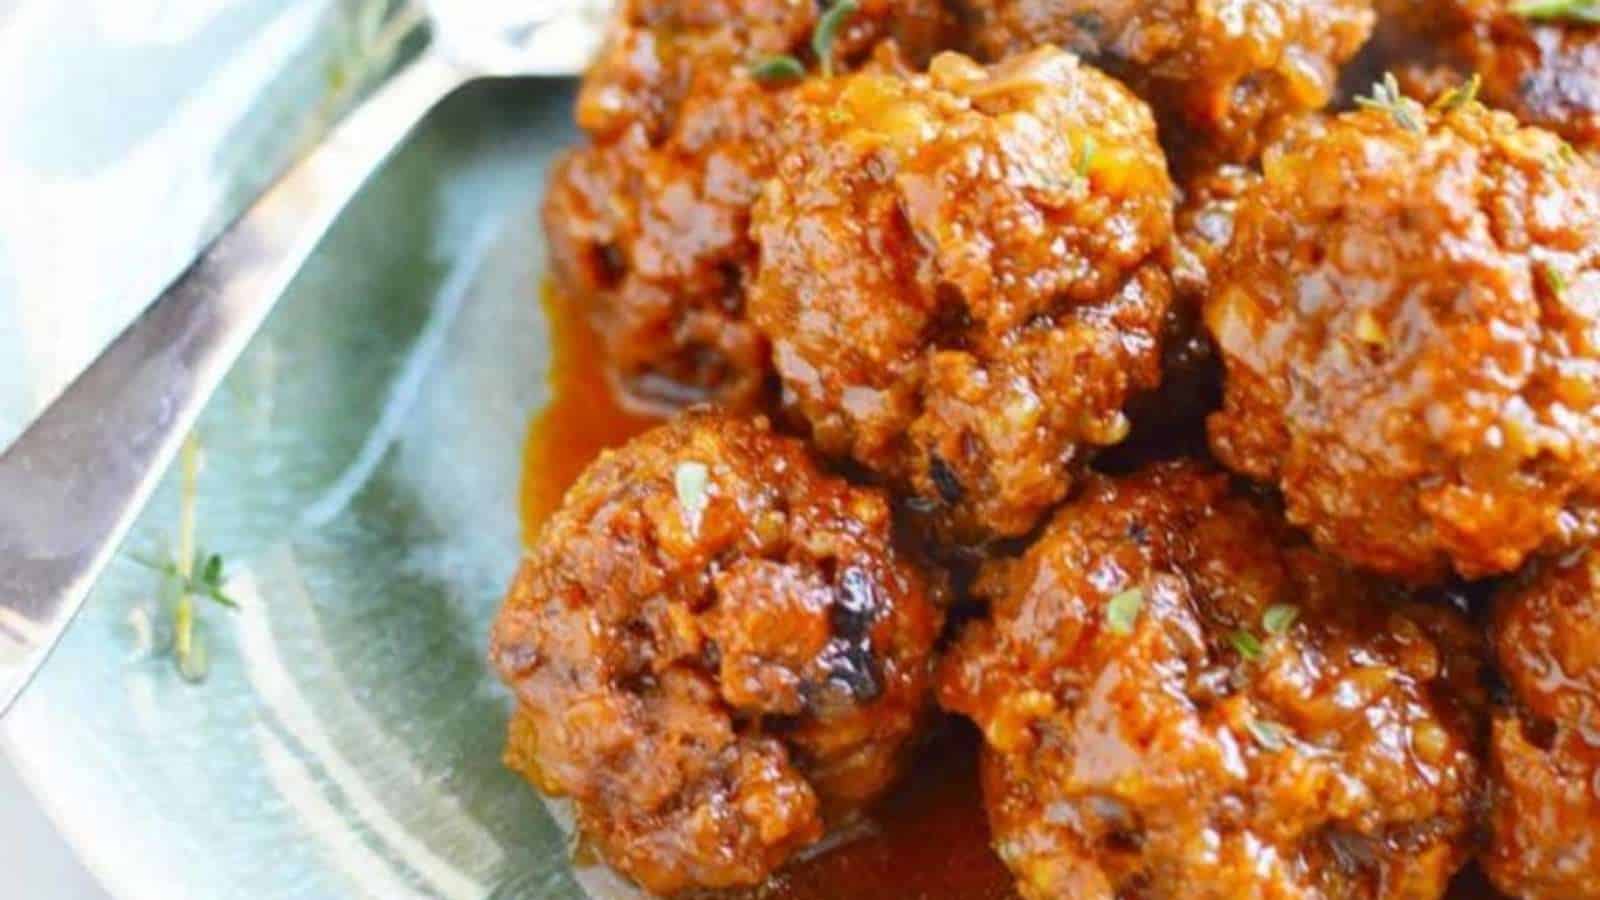 Meatballs in a sauce on a plate.